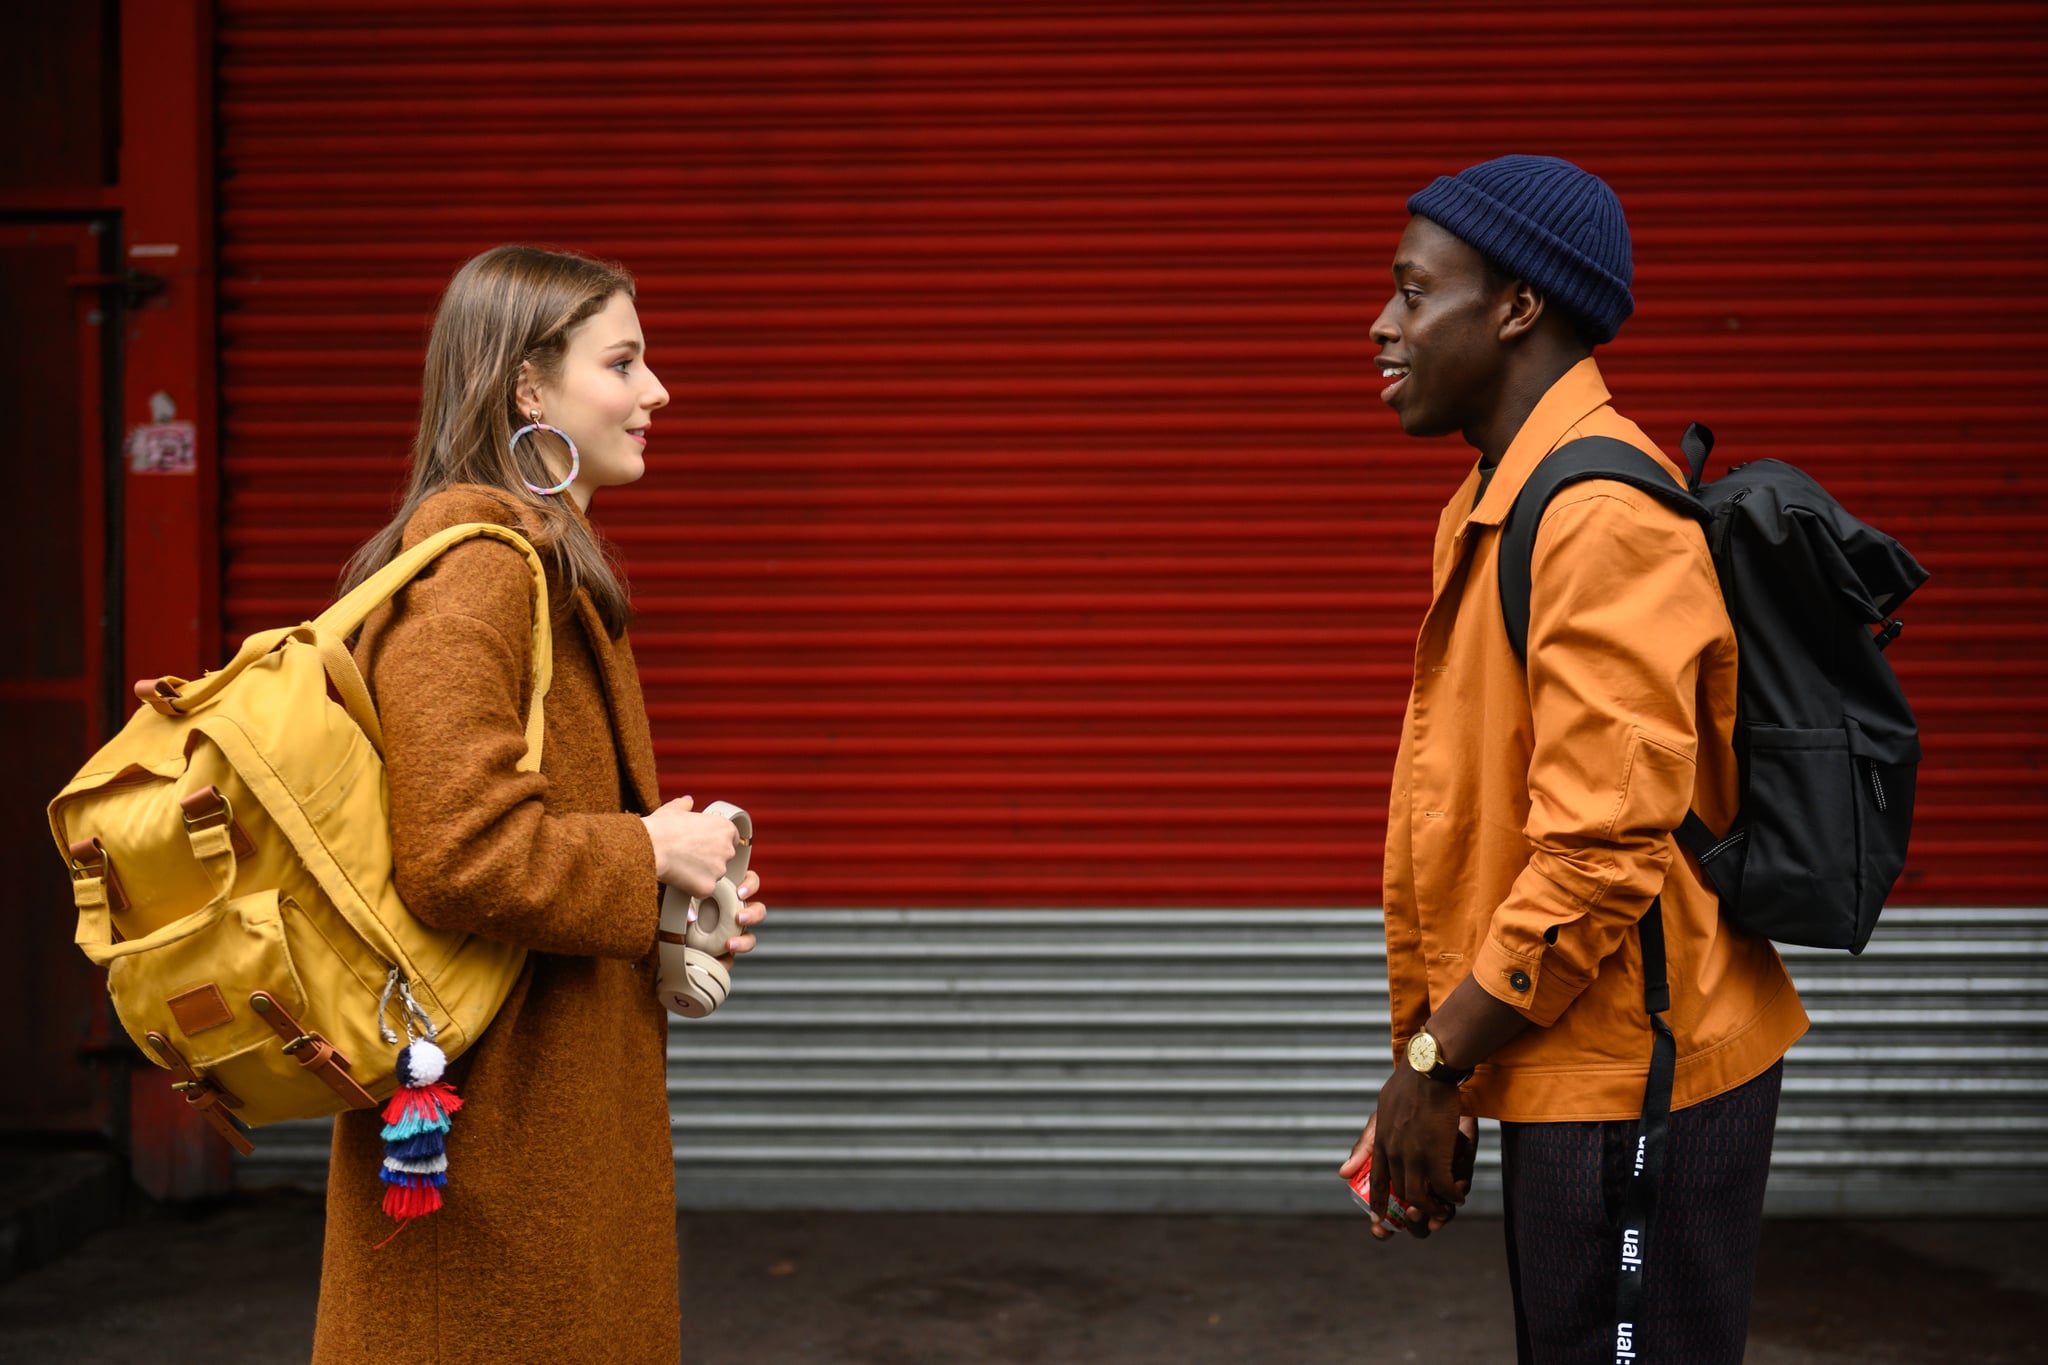 4139_D032_00041_RC Thomasin McKenzie stars as Eloise and Michael Ajao as John in Edgar Wright's LAST NIGHT IN SOHO, a Focus Features release. Credit: Parisa Taghizadeh / © 2021 Focus Features, LLC